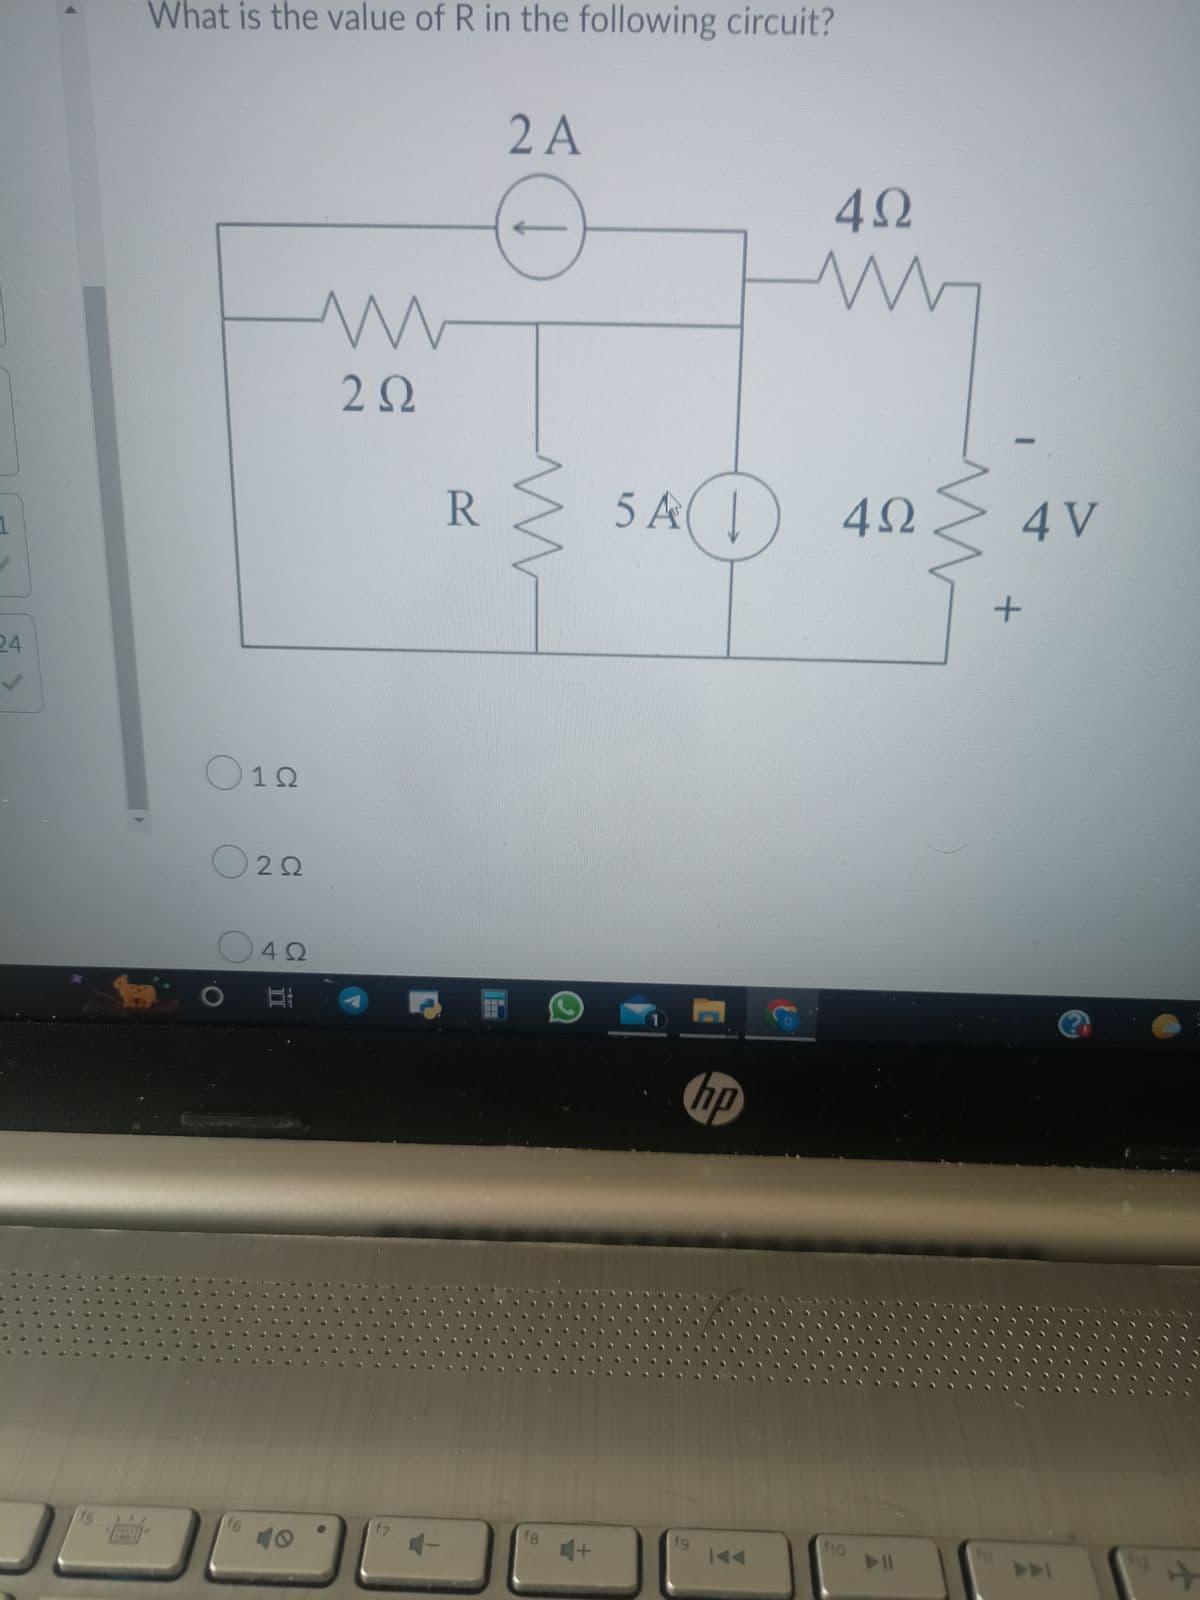 What is the value of R in the following circuit?
2 A
(I
1) 42
4 V
R
24
O12
O22
1
hp
410
12
f7
f8
fg
